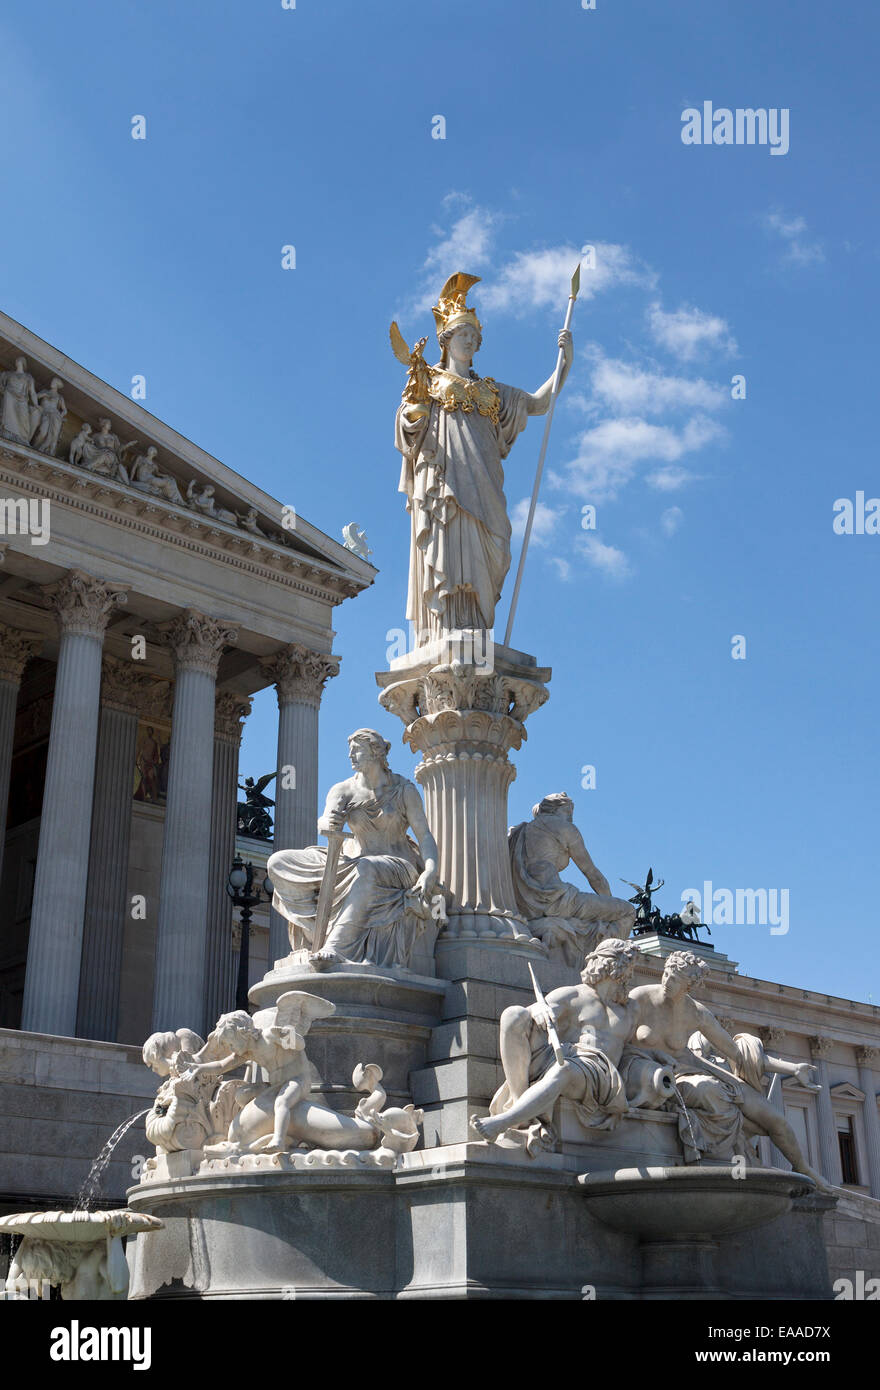 The Athena Fountain (Pallas-Athene-Brunnen) in front of the Austrian Parliament building in Vienna Stock Photo